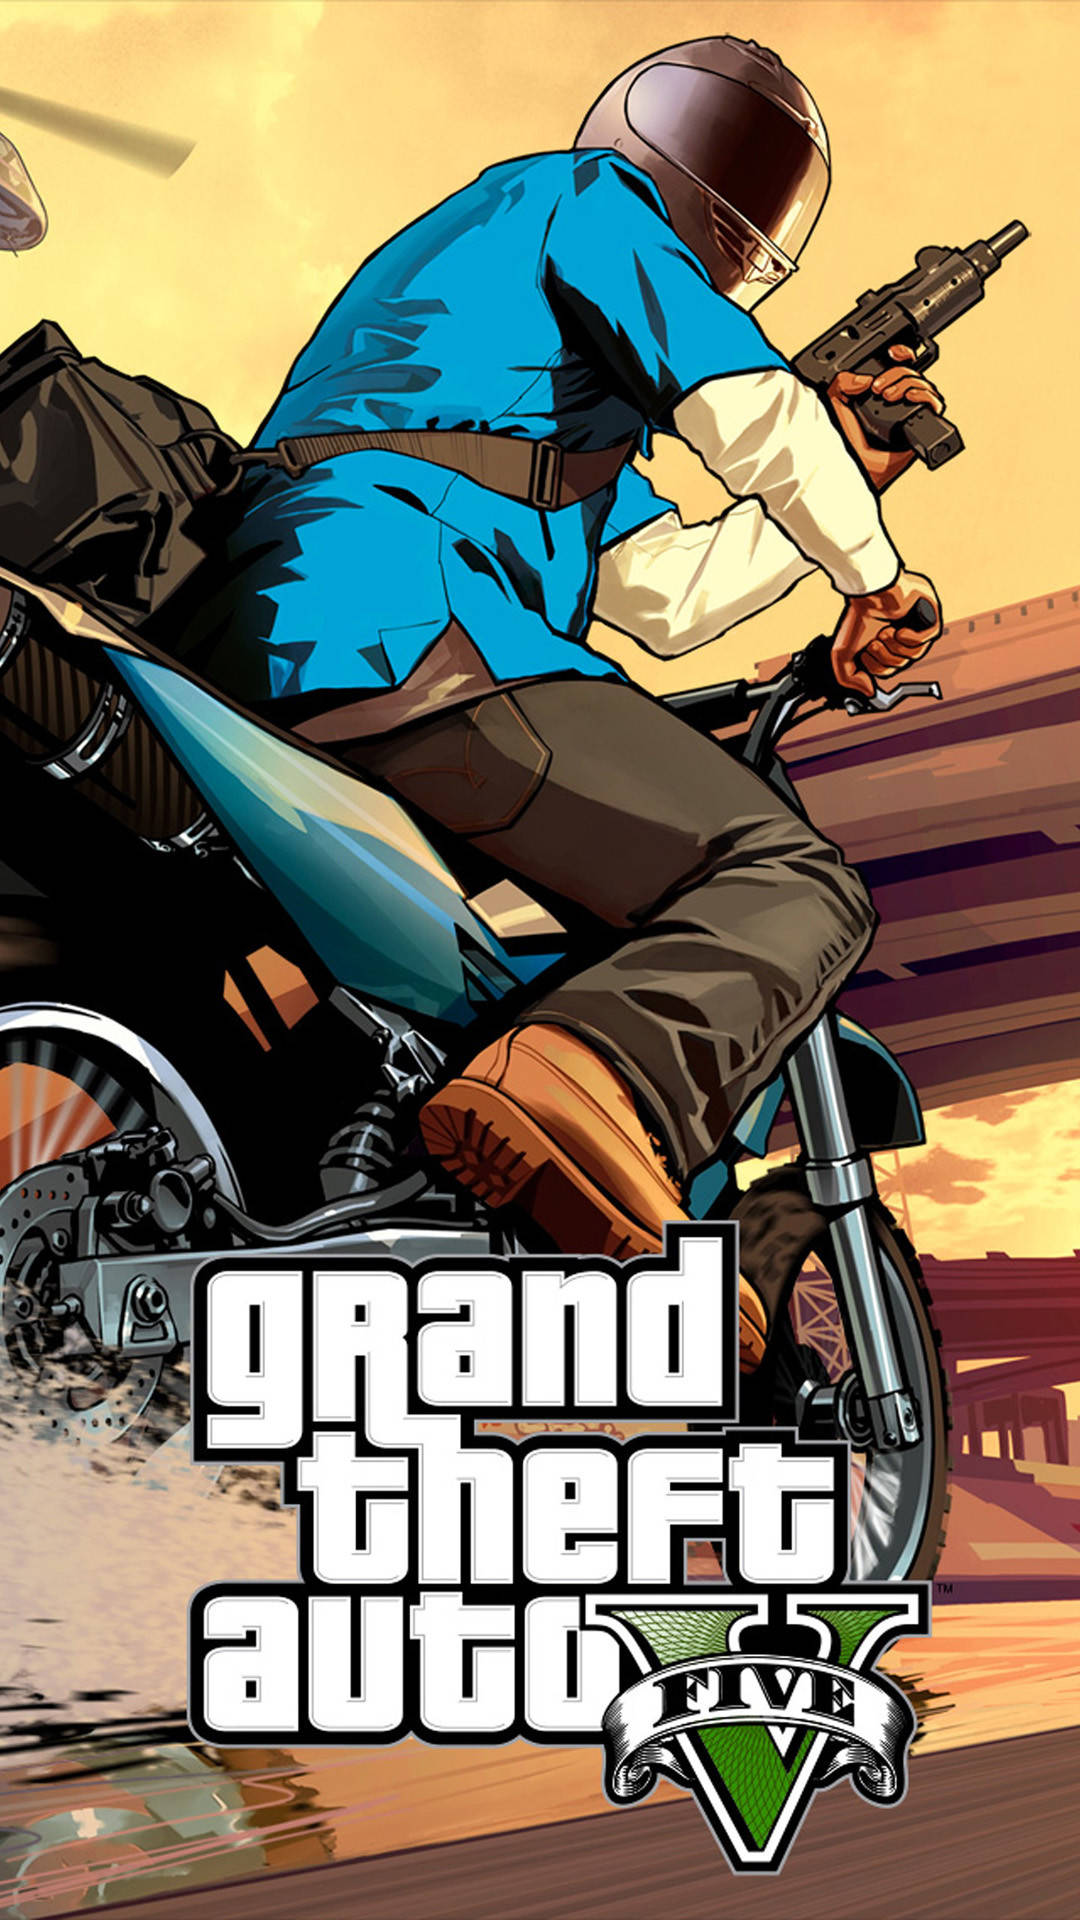 Grand Theft Auto 5 on an iPhone - the ultimate gaming experience Wallpaper